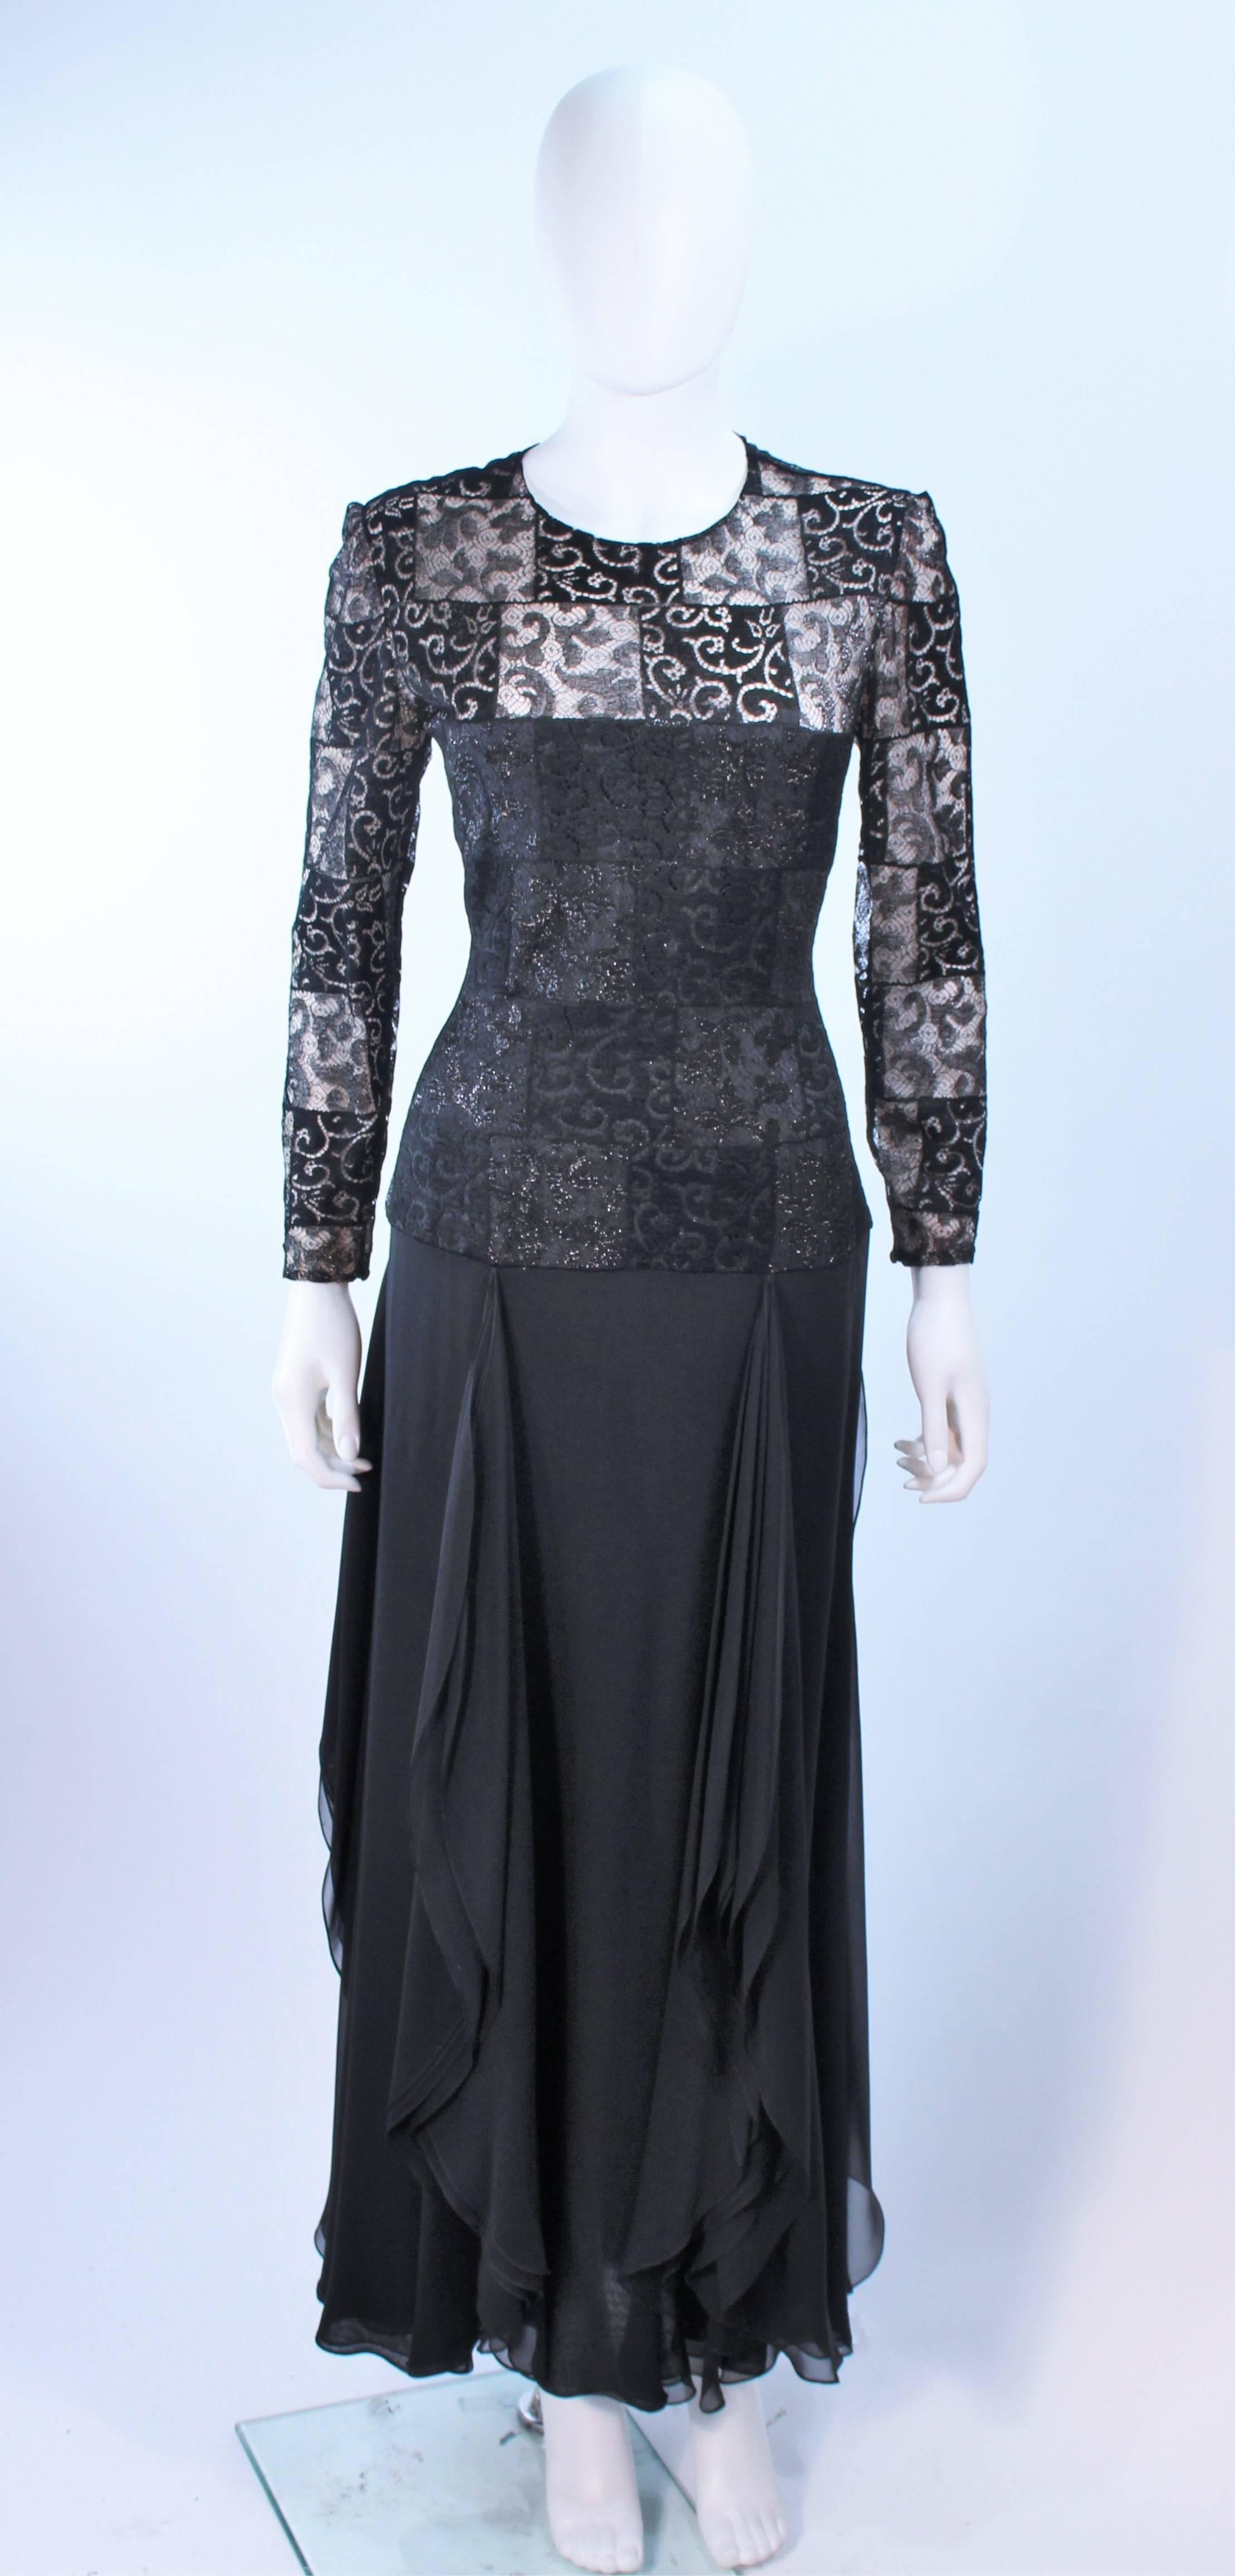 This gown is composed of black metallic lace with a chiffon draped skirt. Features a nude interior bodice lining and a center back zipper. In excellent vintage condition.

**Please cross-reference measurements for personal accuracy. Size in